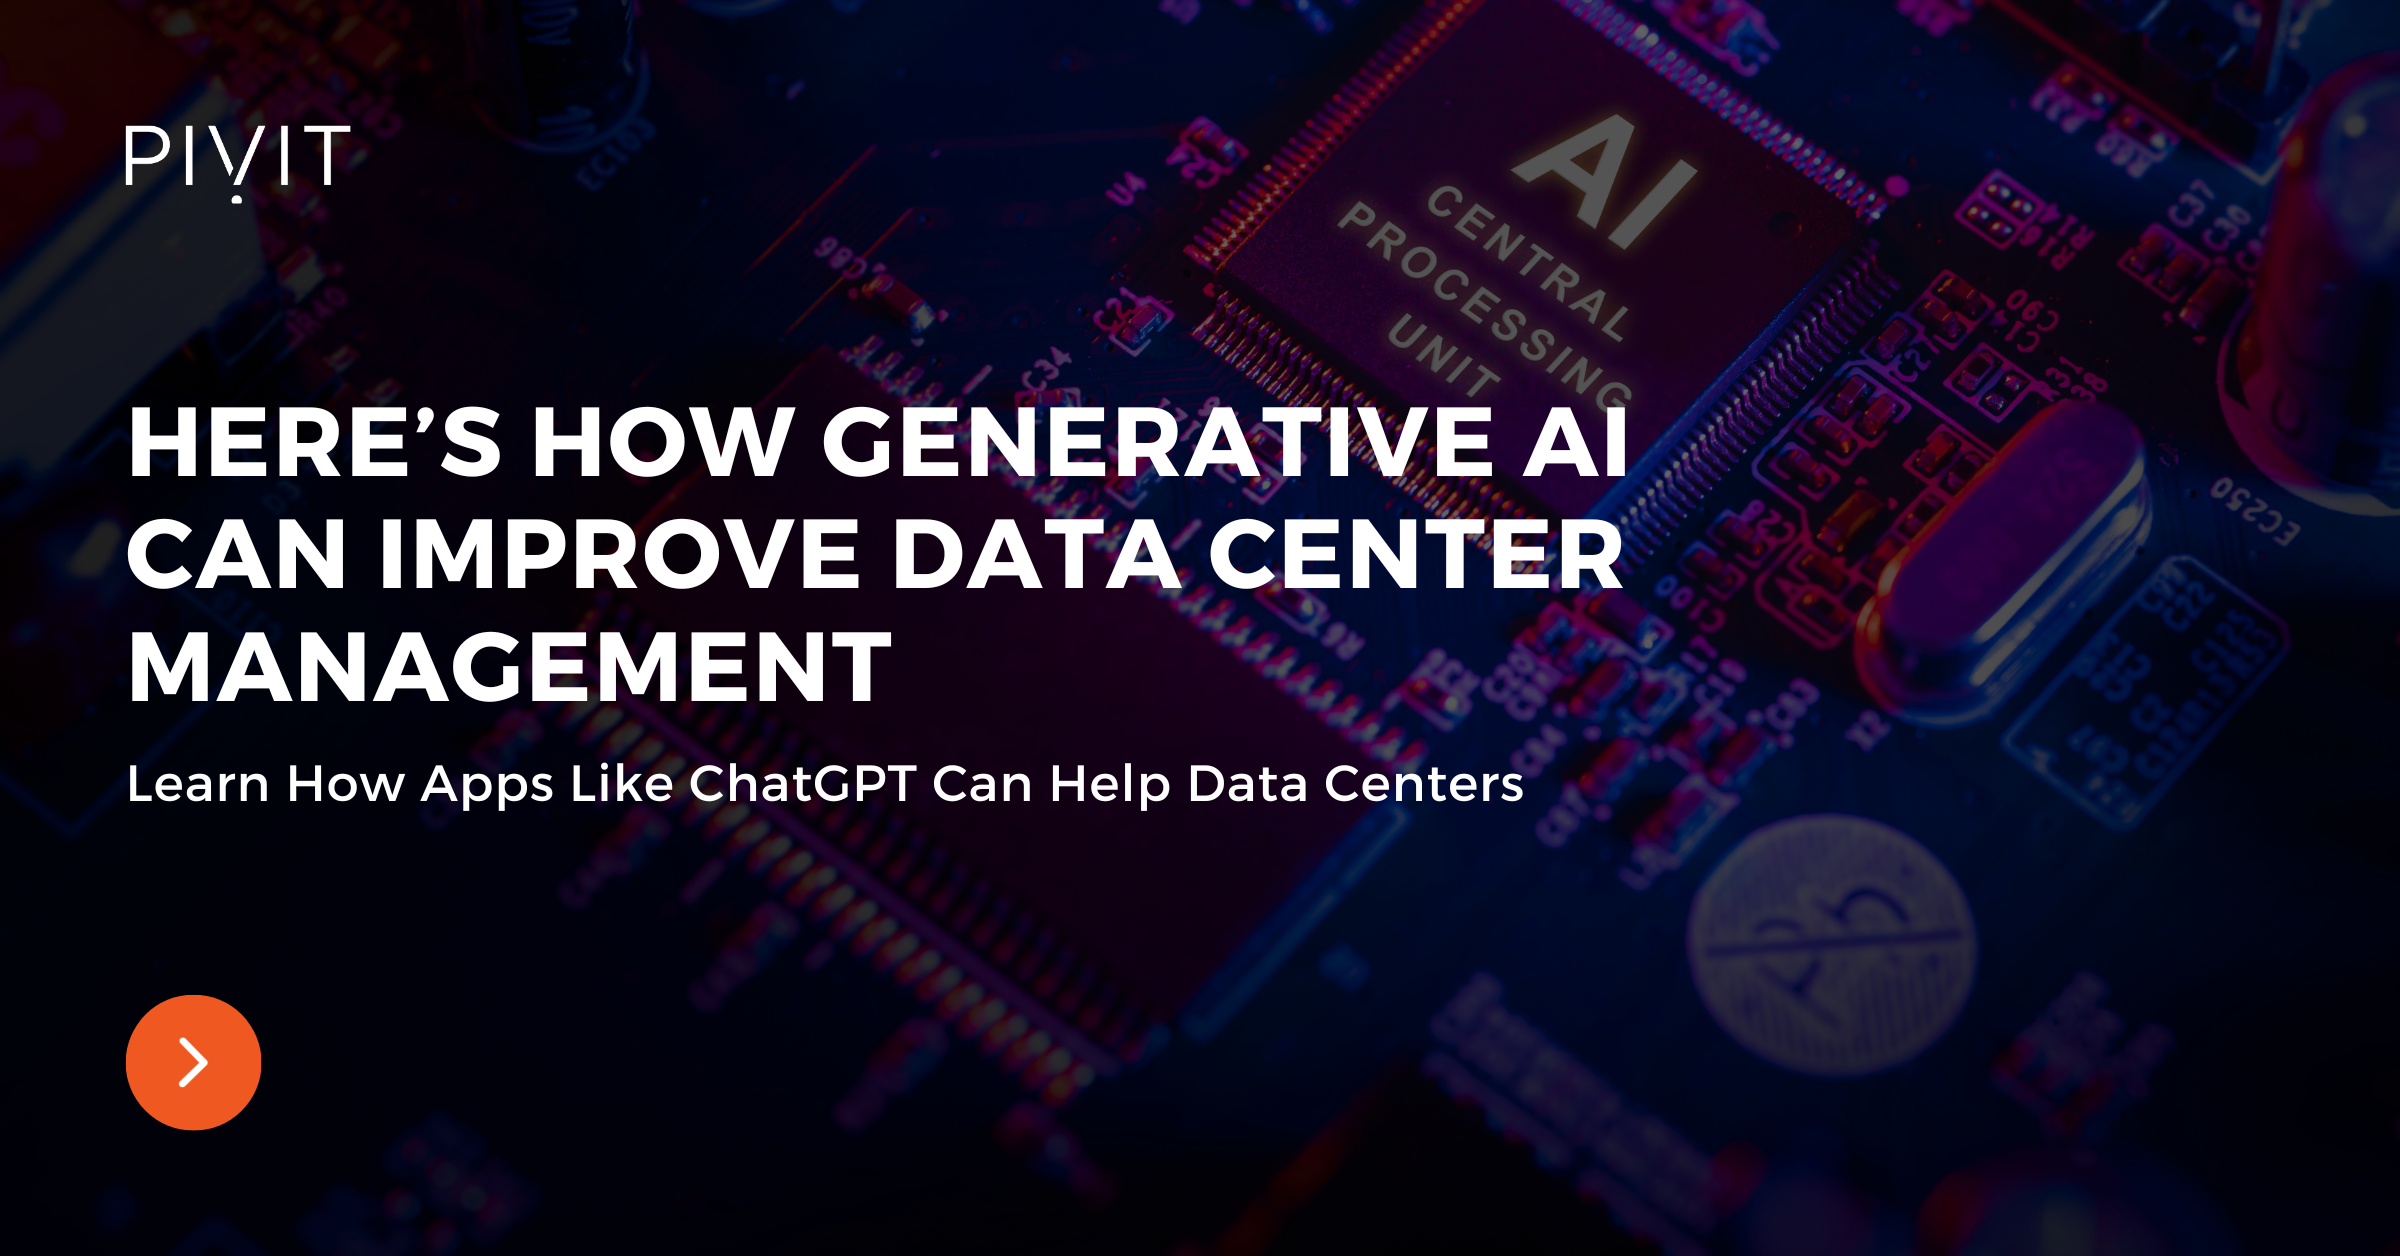 Here’s How Generative AI Can Improve Data Center Management - Learn How Apps Like ChatGPT Can Help Data Centers